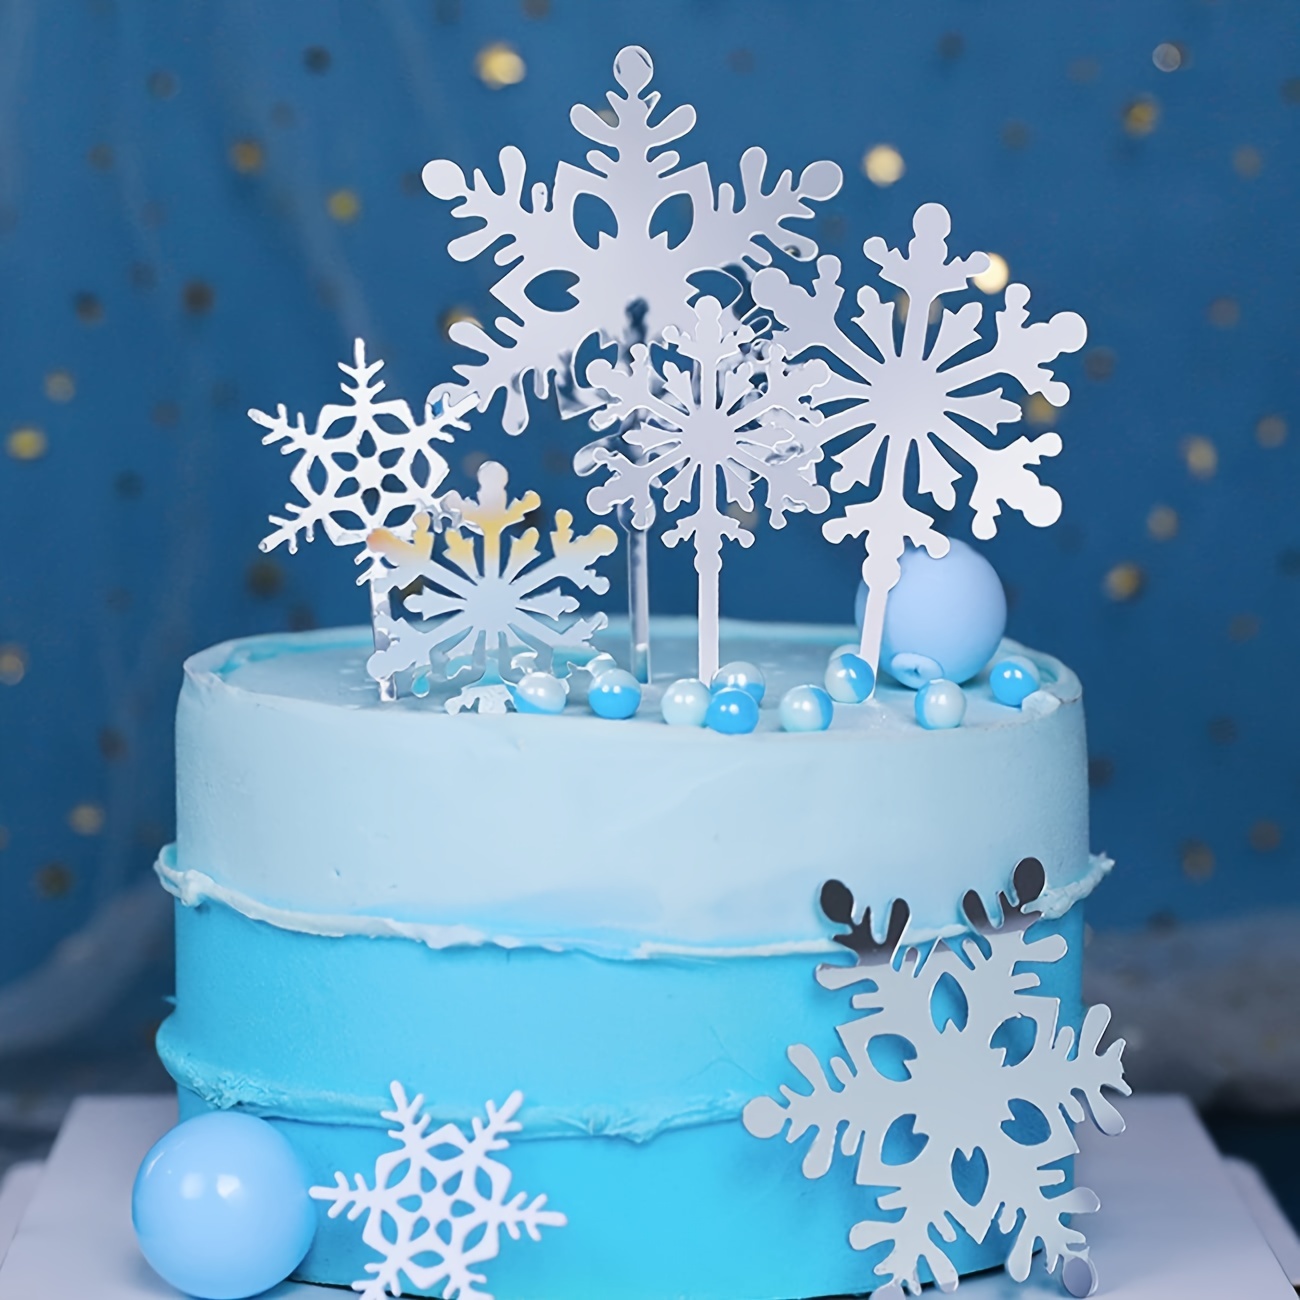 Snowflakes edible cake ribbon border image party decoration Ice Queen  Frozen new